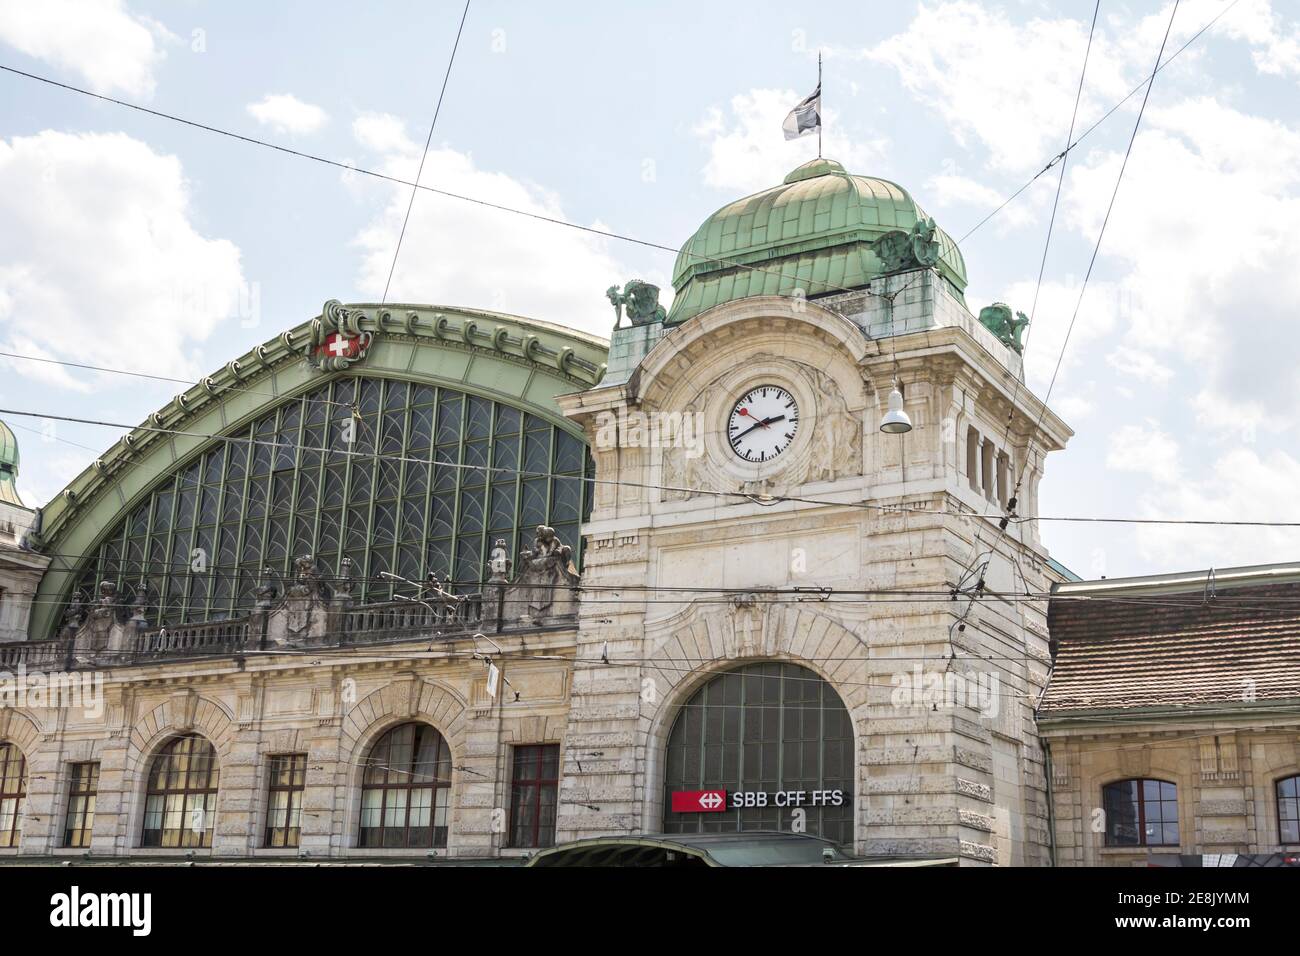 Basel, SWITZERLAND: The Main Railway Station (Bahnhof Basel SBB) And Trams Transit in From Of the Station Stock Photo